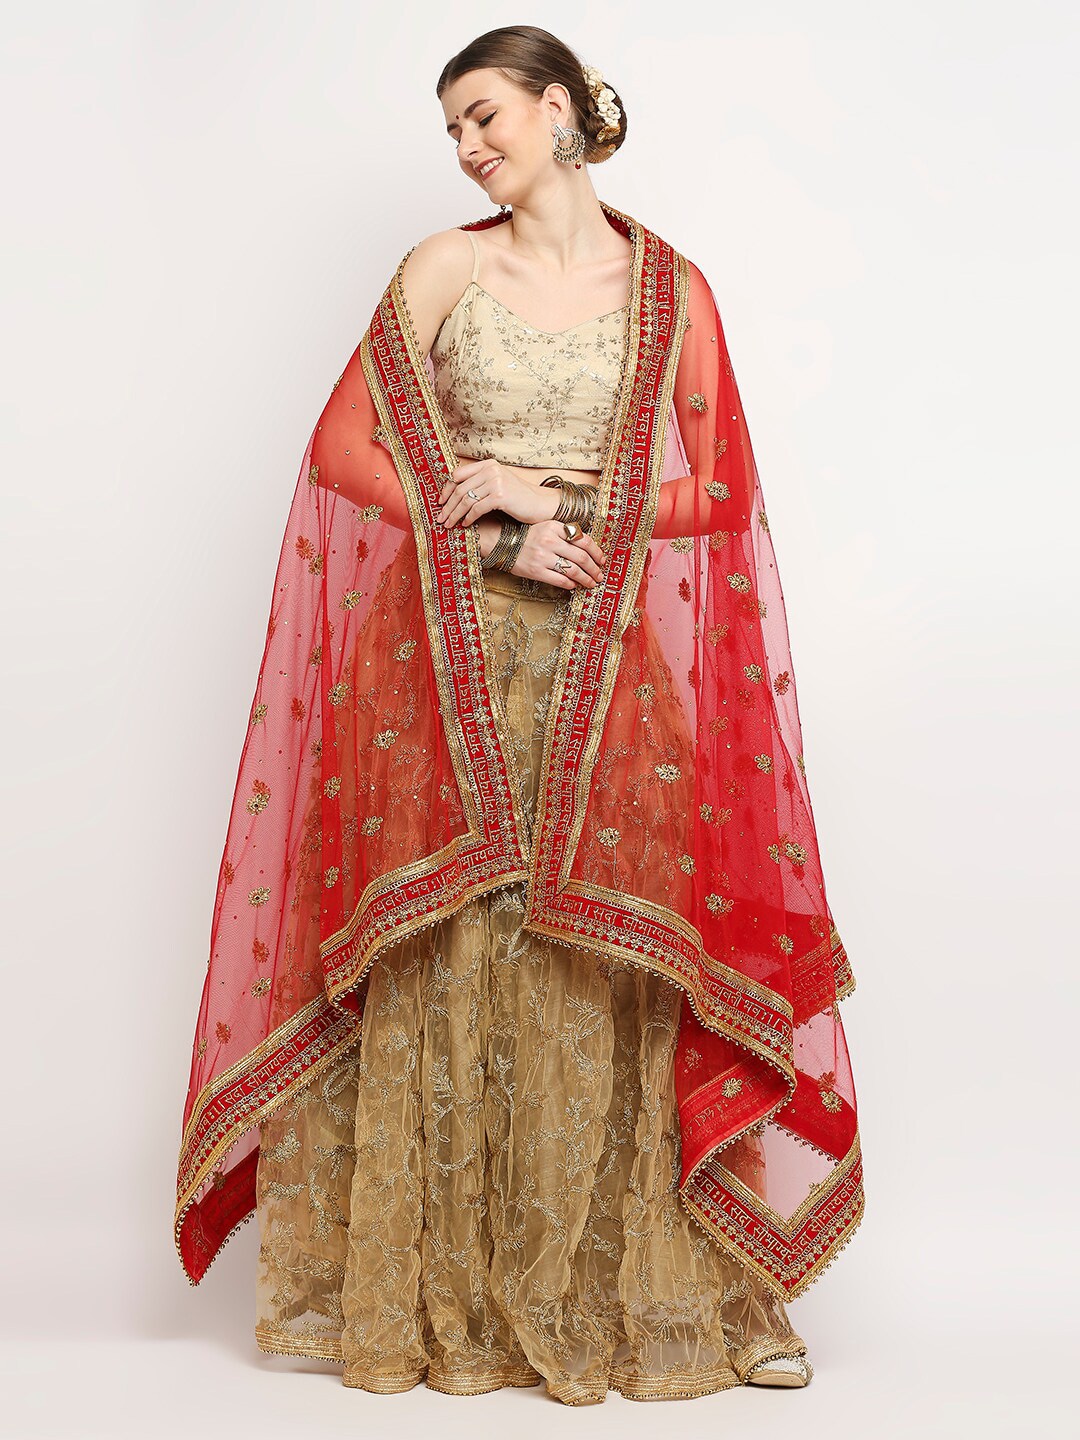 Dupatta Bazaar Red & Gold-Toned Ethnic Motifs Embroidered Dupatta with Beads and Stones Price in India